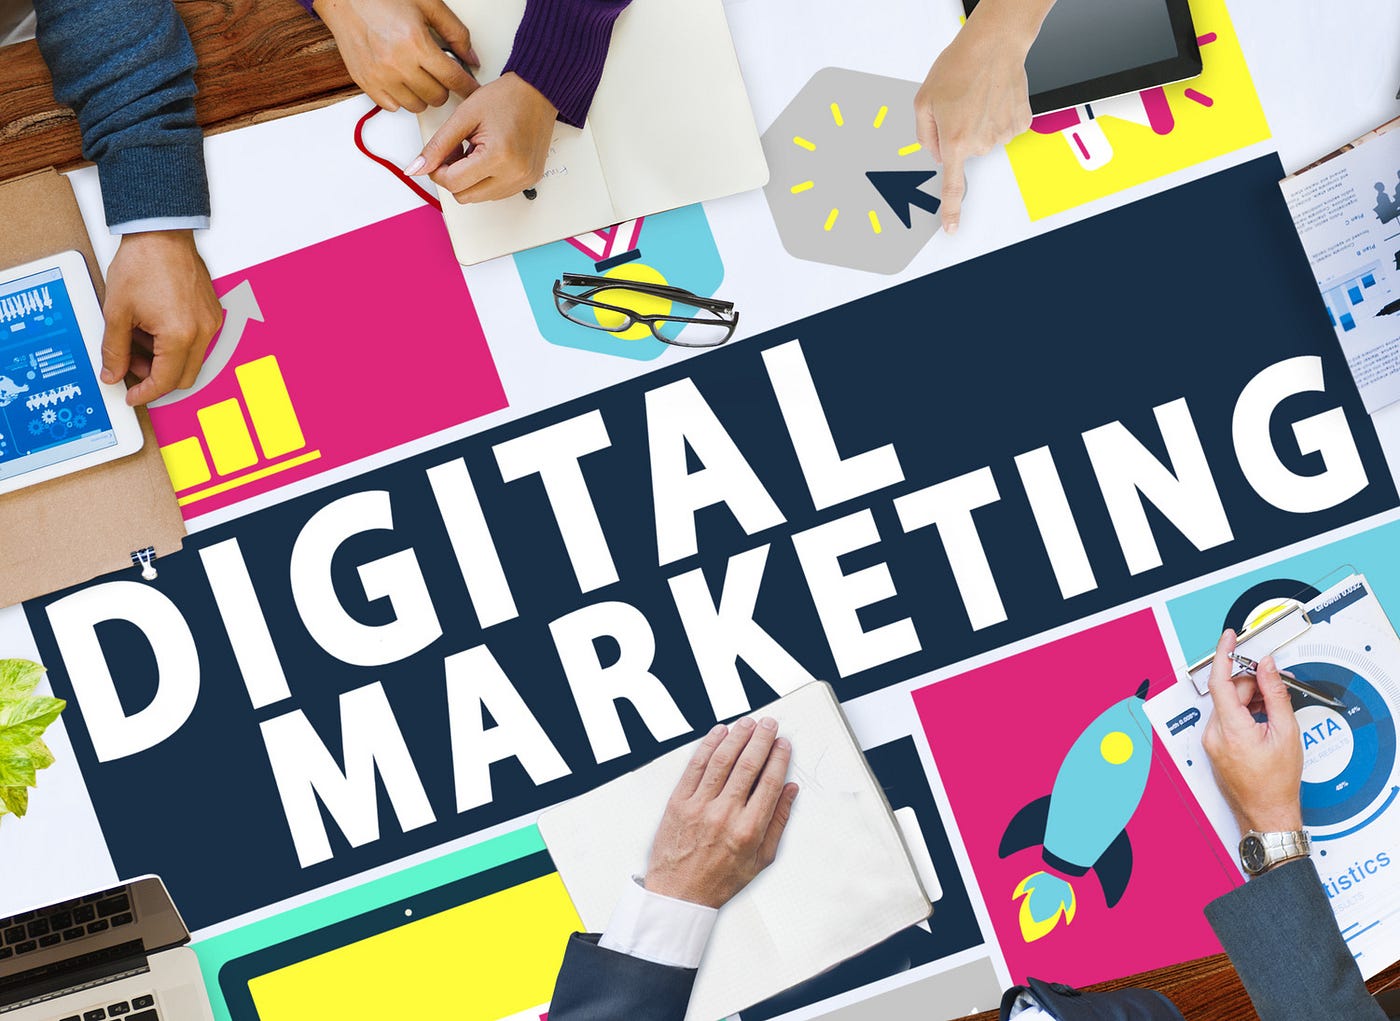 Digital Marketing Services in Manchester